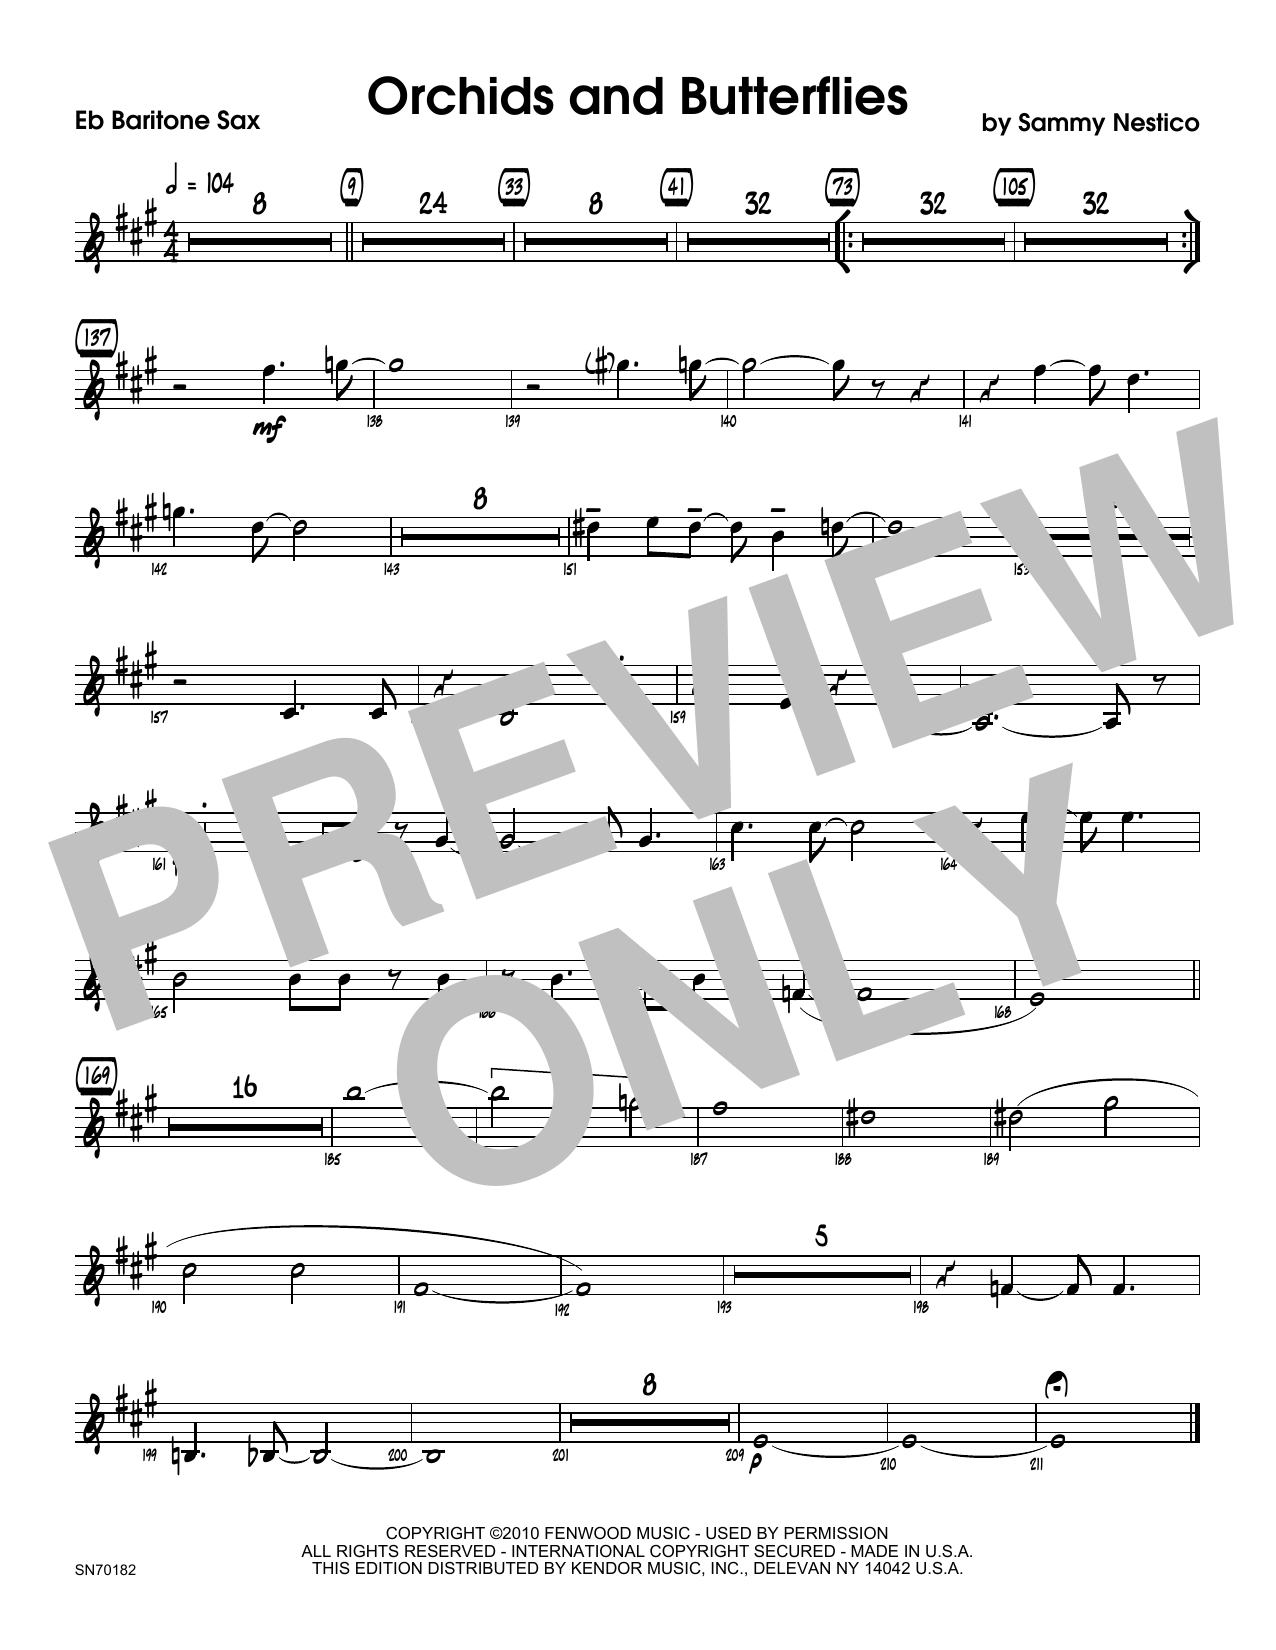 Download Sammy Nestico Orchids And Butterflies - Eb Baritone S Sheet Music